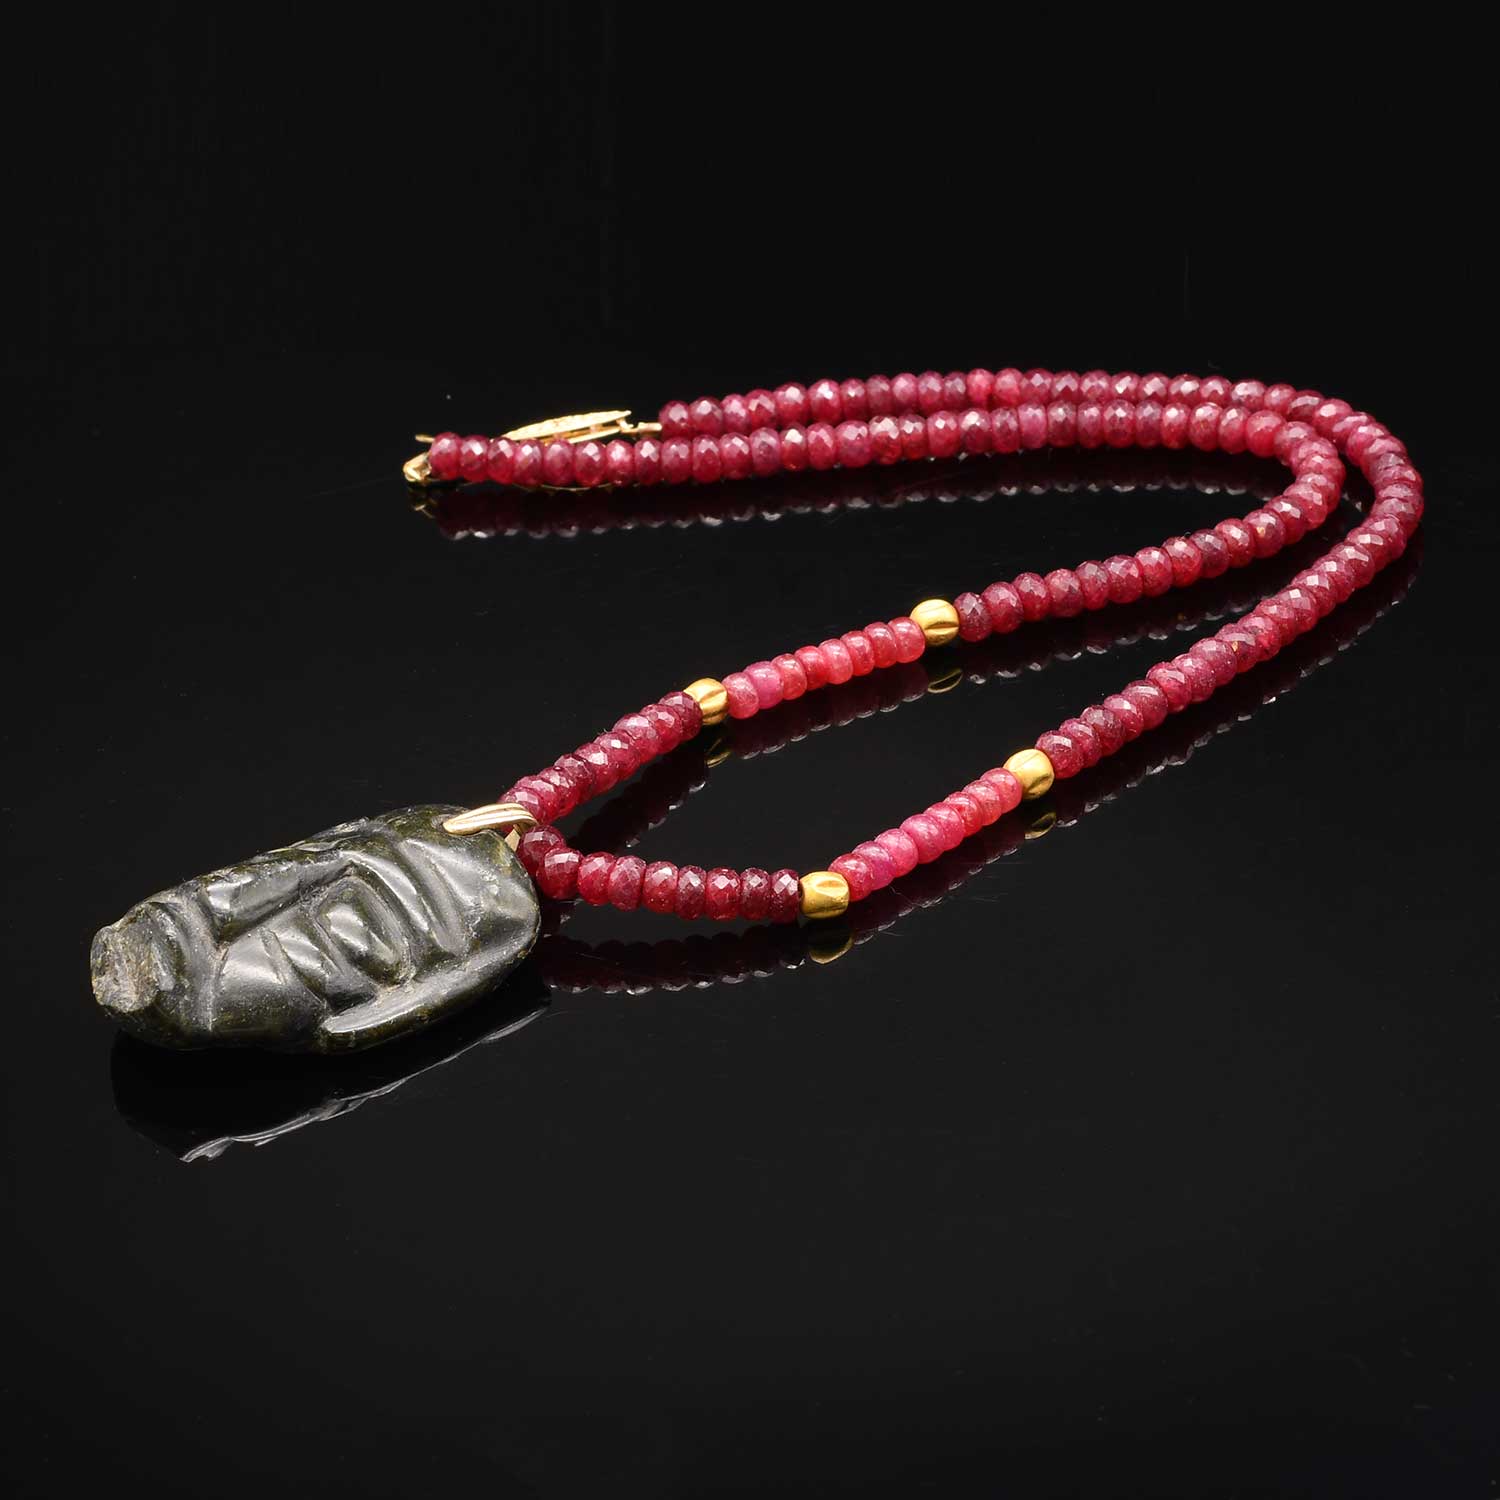 A Costa Rican Jade Pendant Mask, ca. 300 - 500 CE, restrung on ruby necklace